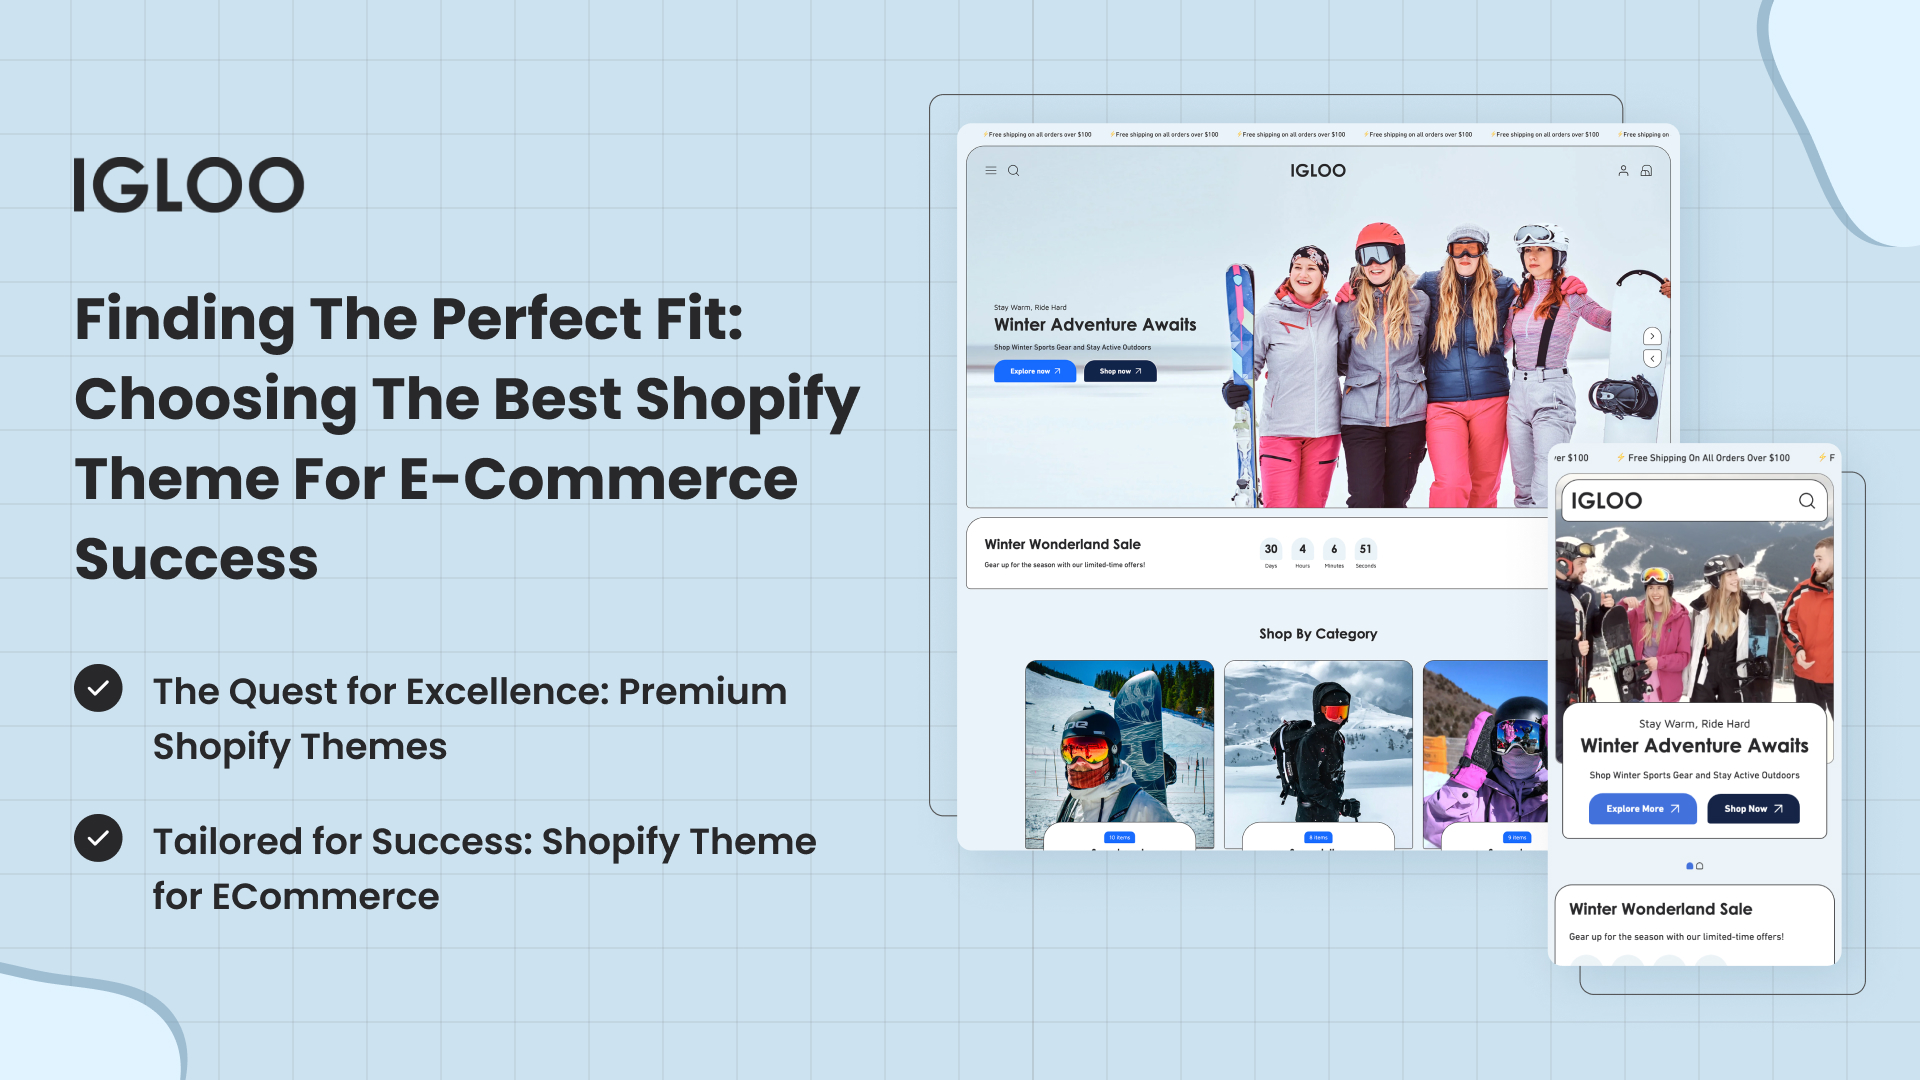 Finding the Perfect Fit: Choosing the Best Shopify Theme for E-Commerce Success